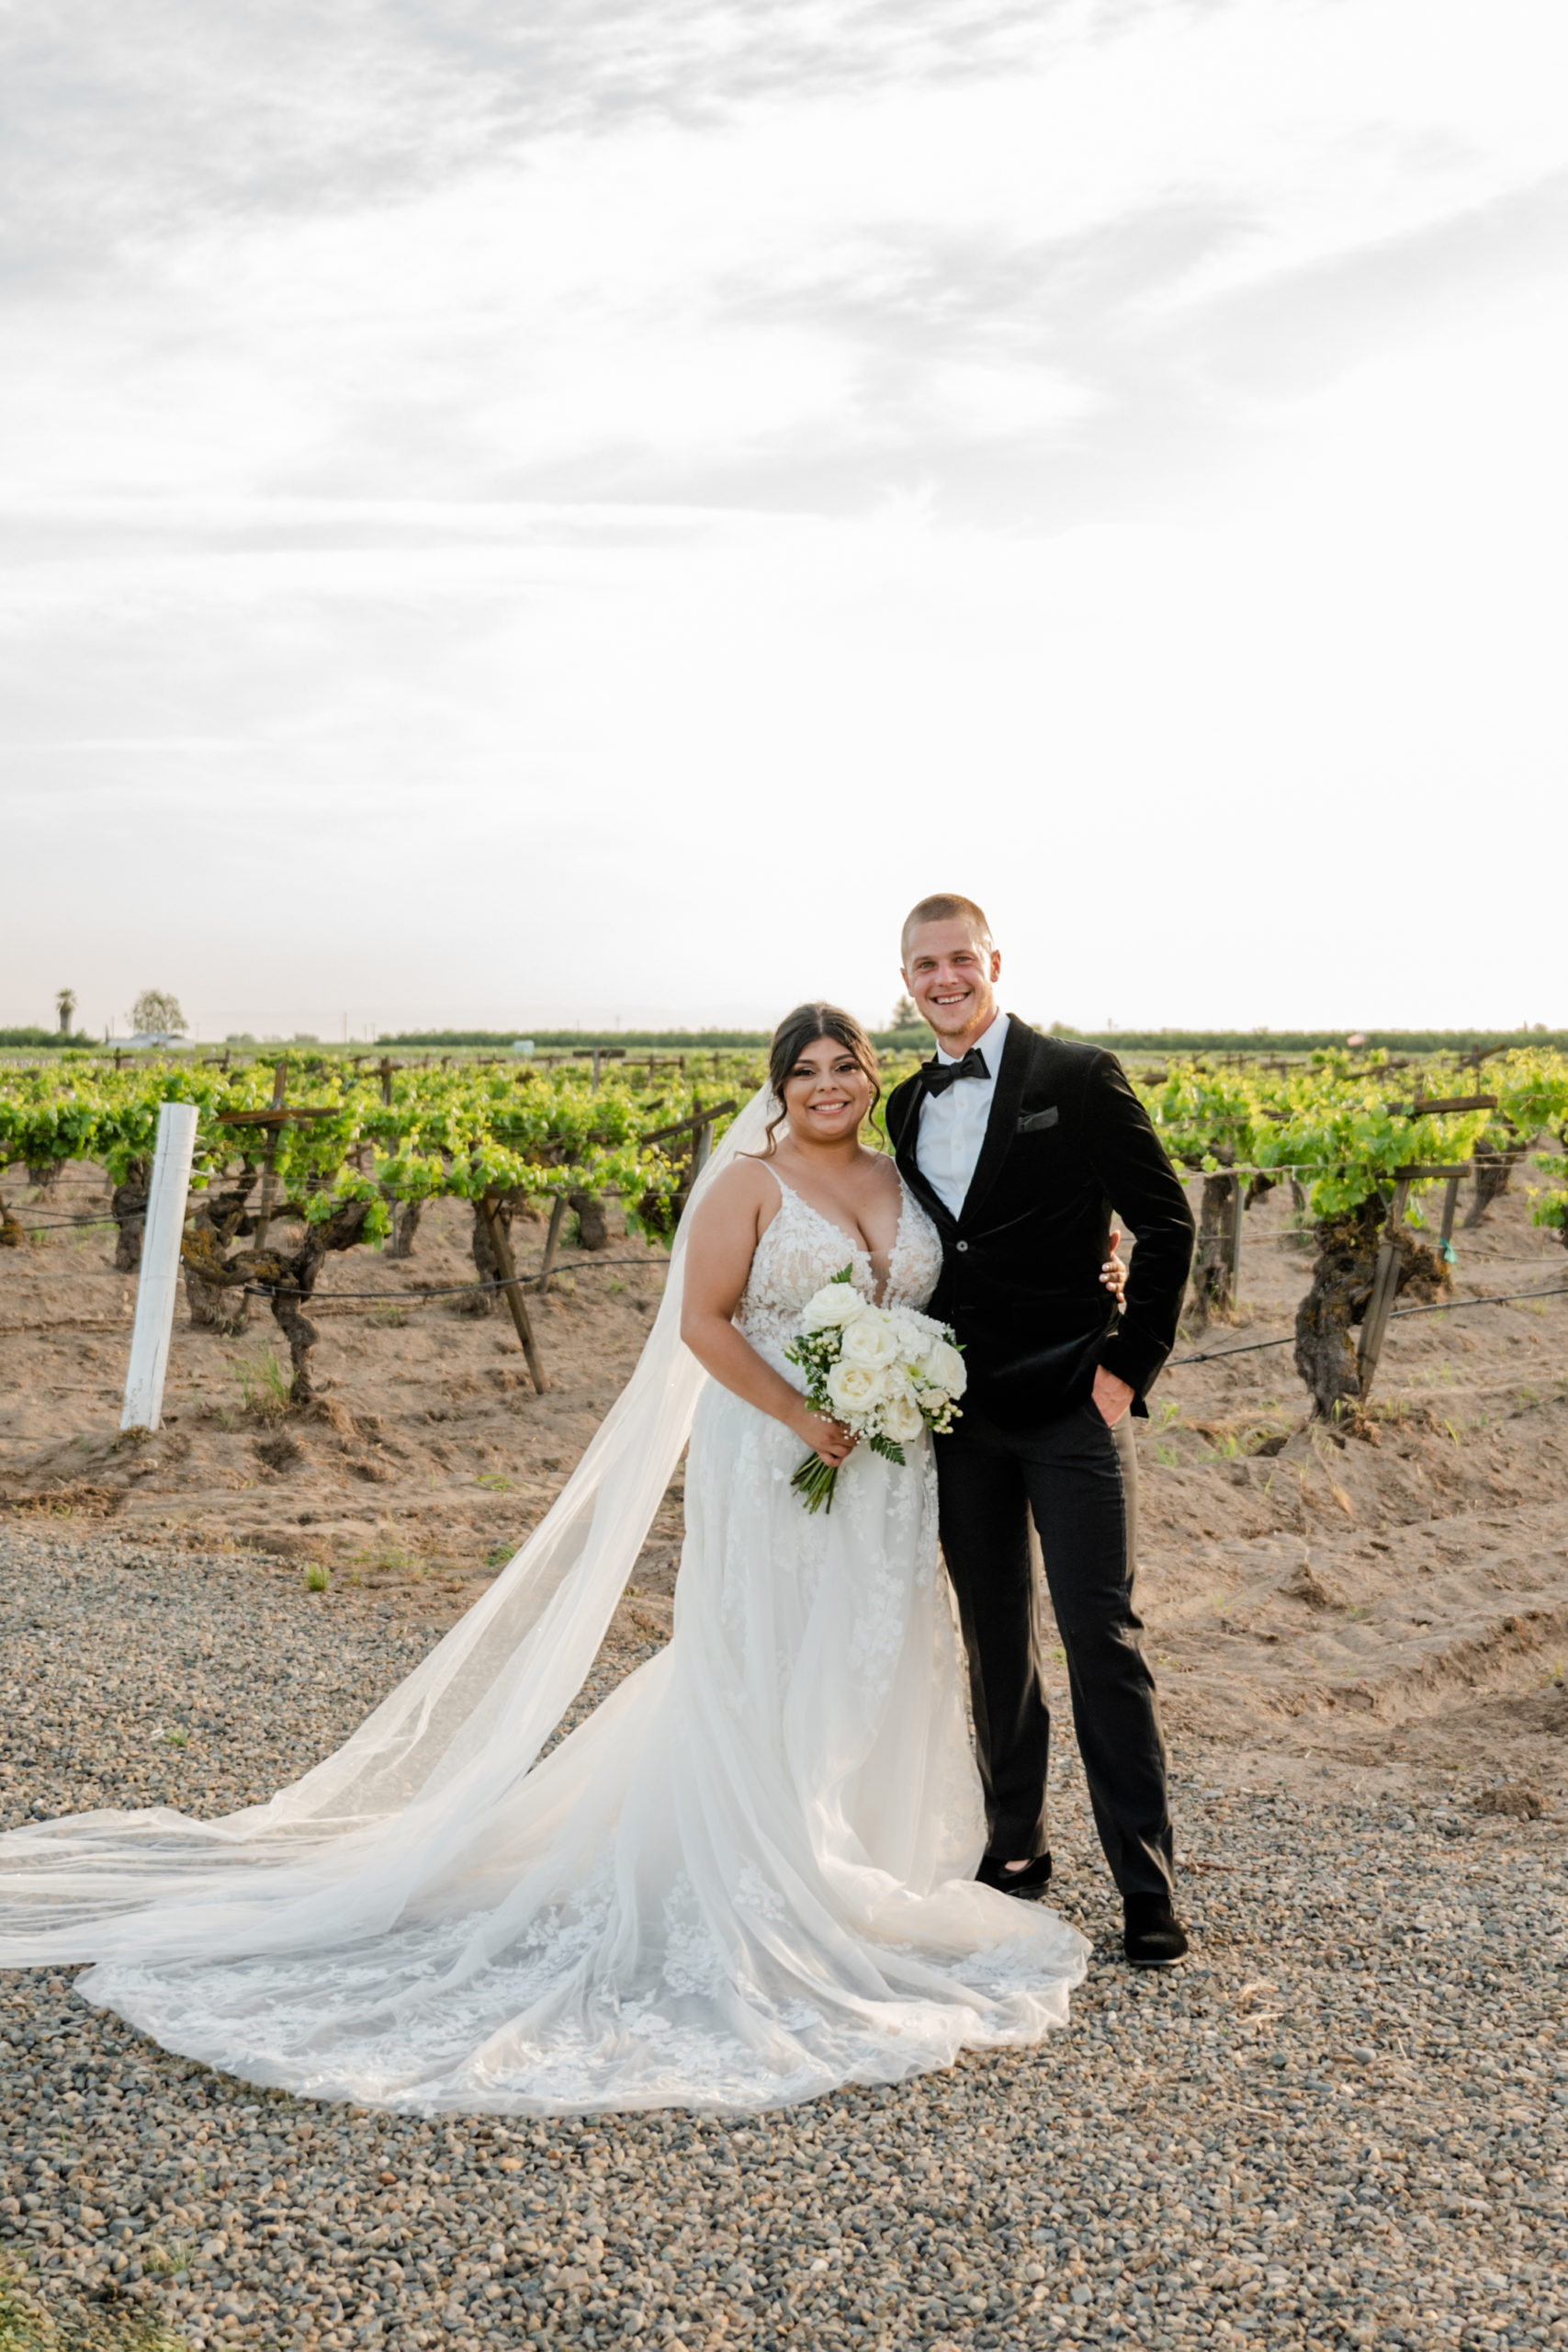 "Elegant bride and groom saying I do in front of lush greenery at Evanelle Vineyards, the perfect setting for a dream wedding.